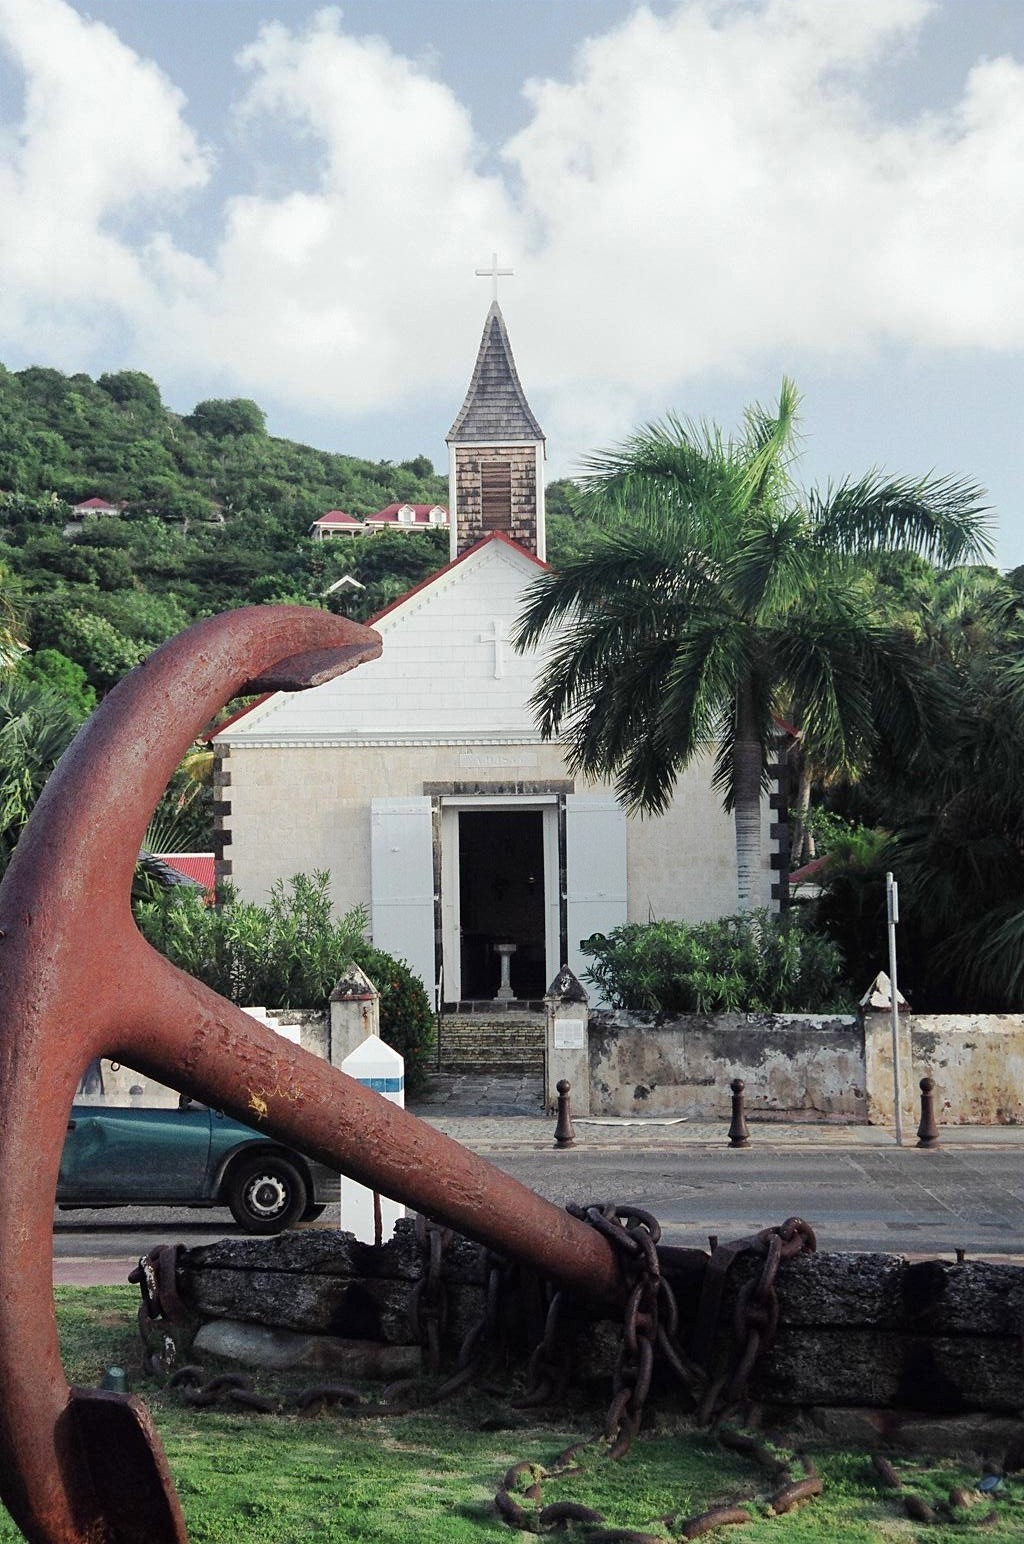 The Anglican church in the center of Gustavia, St Barths